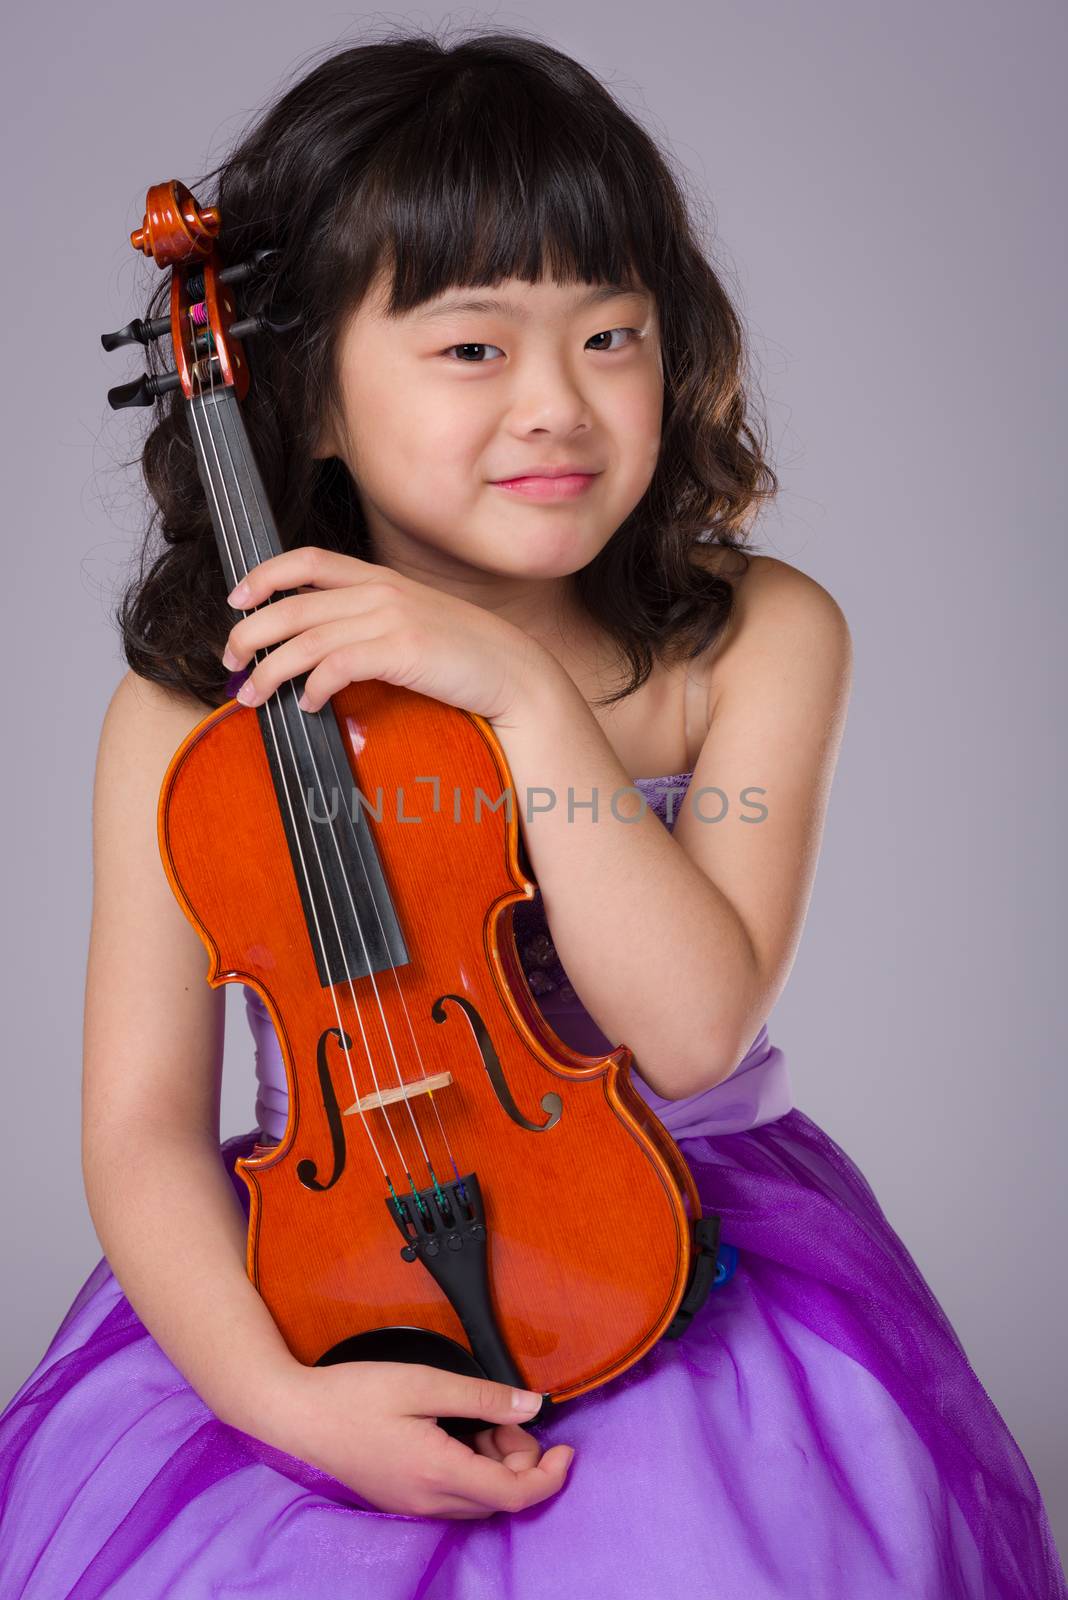 A portrait of a cute, happy and young Japanese girl in a purple dress on a grey background with a violin.